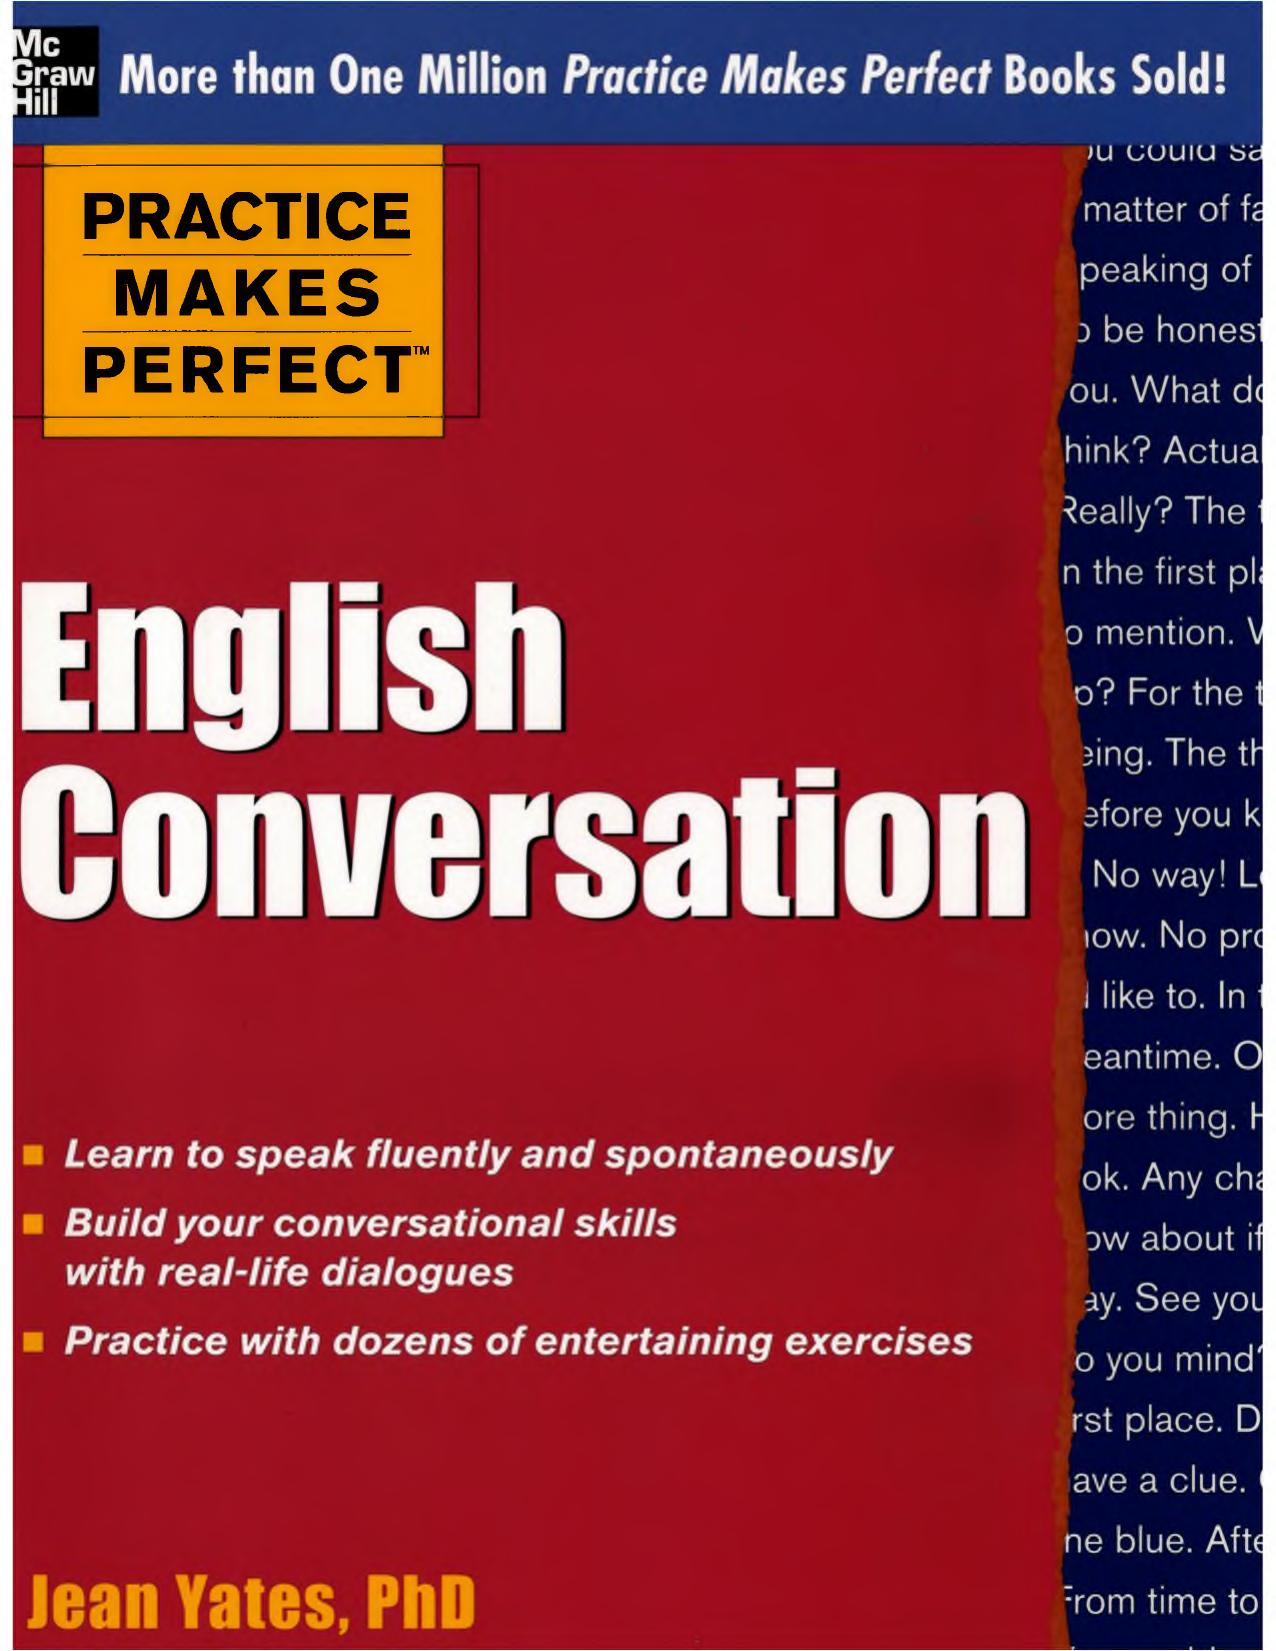 Practice Makes Perfect: English Conversation by Jean Yates